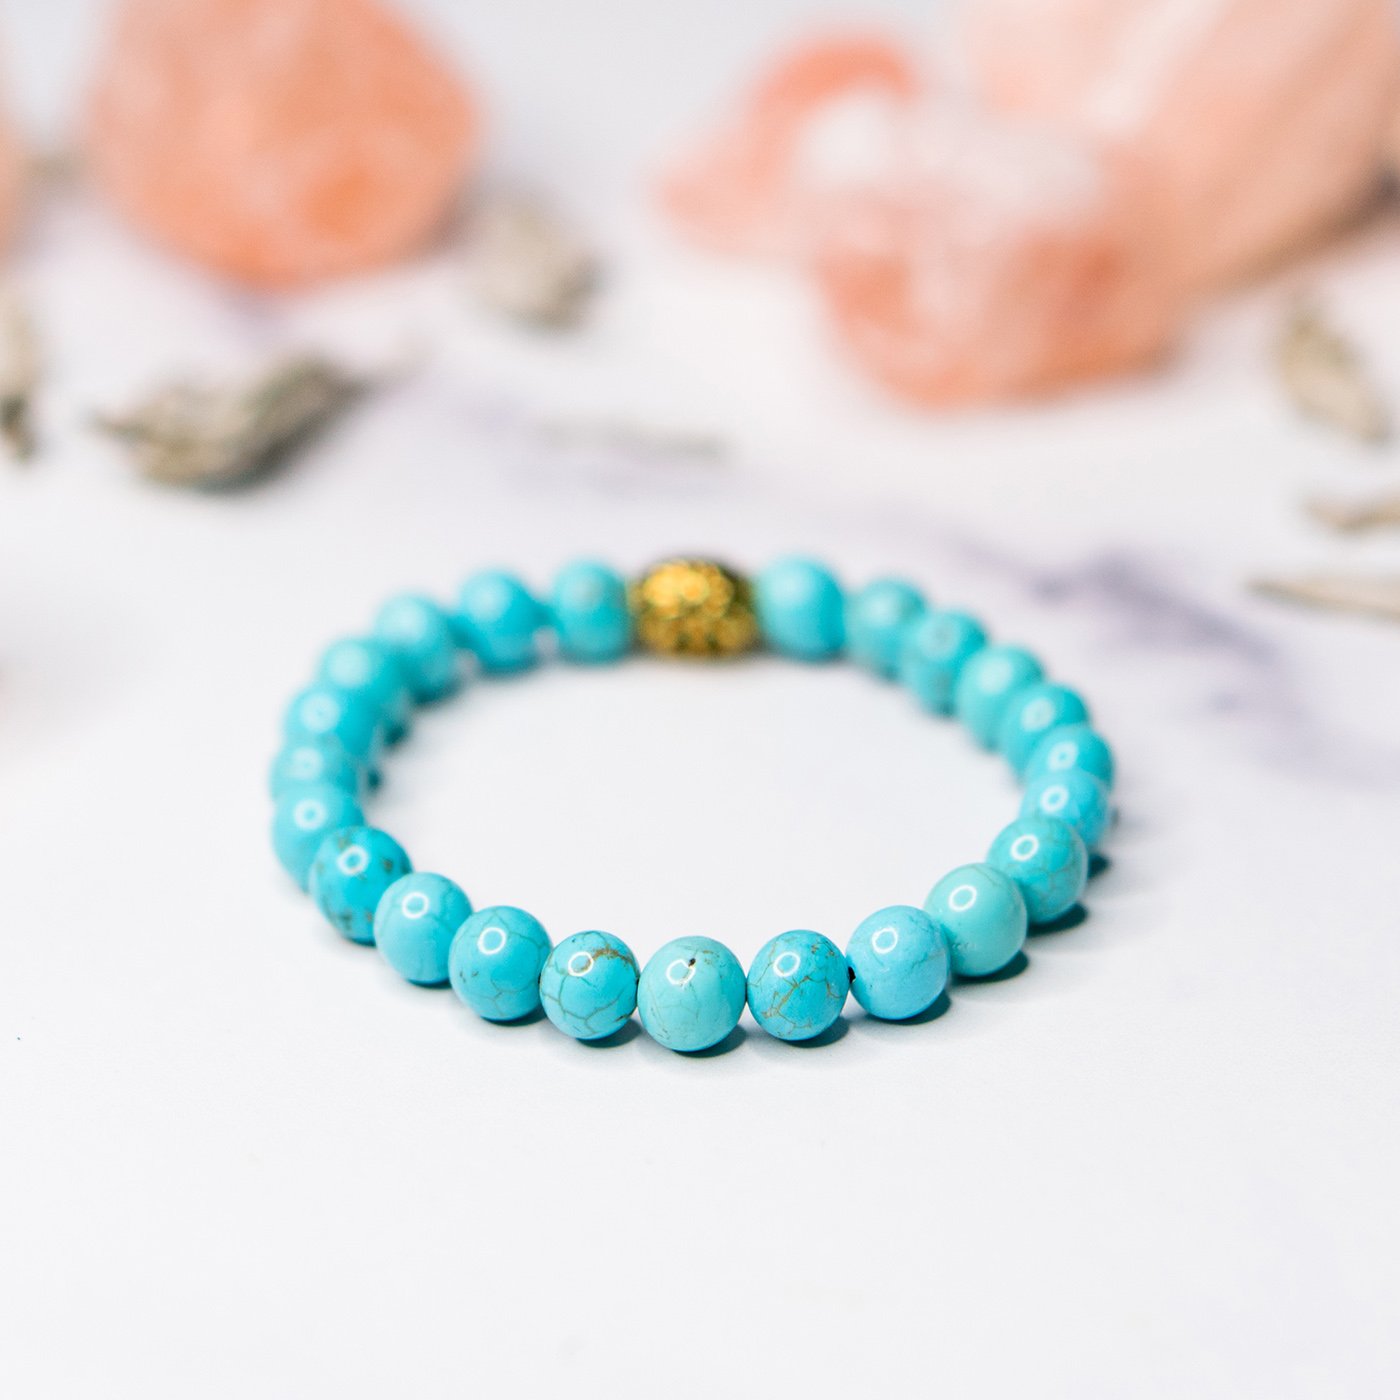 Turquoise Small Wrist Wear